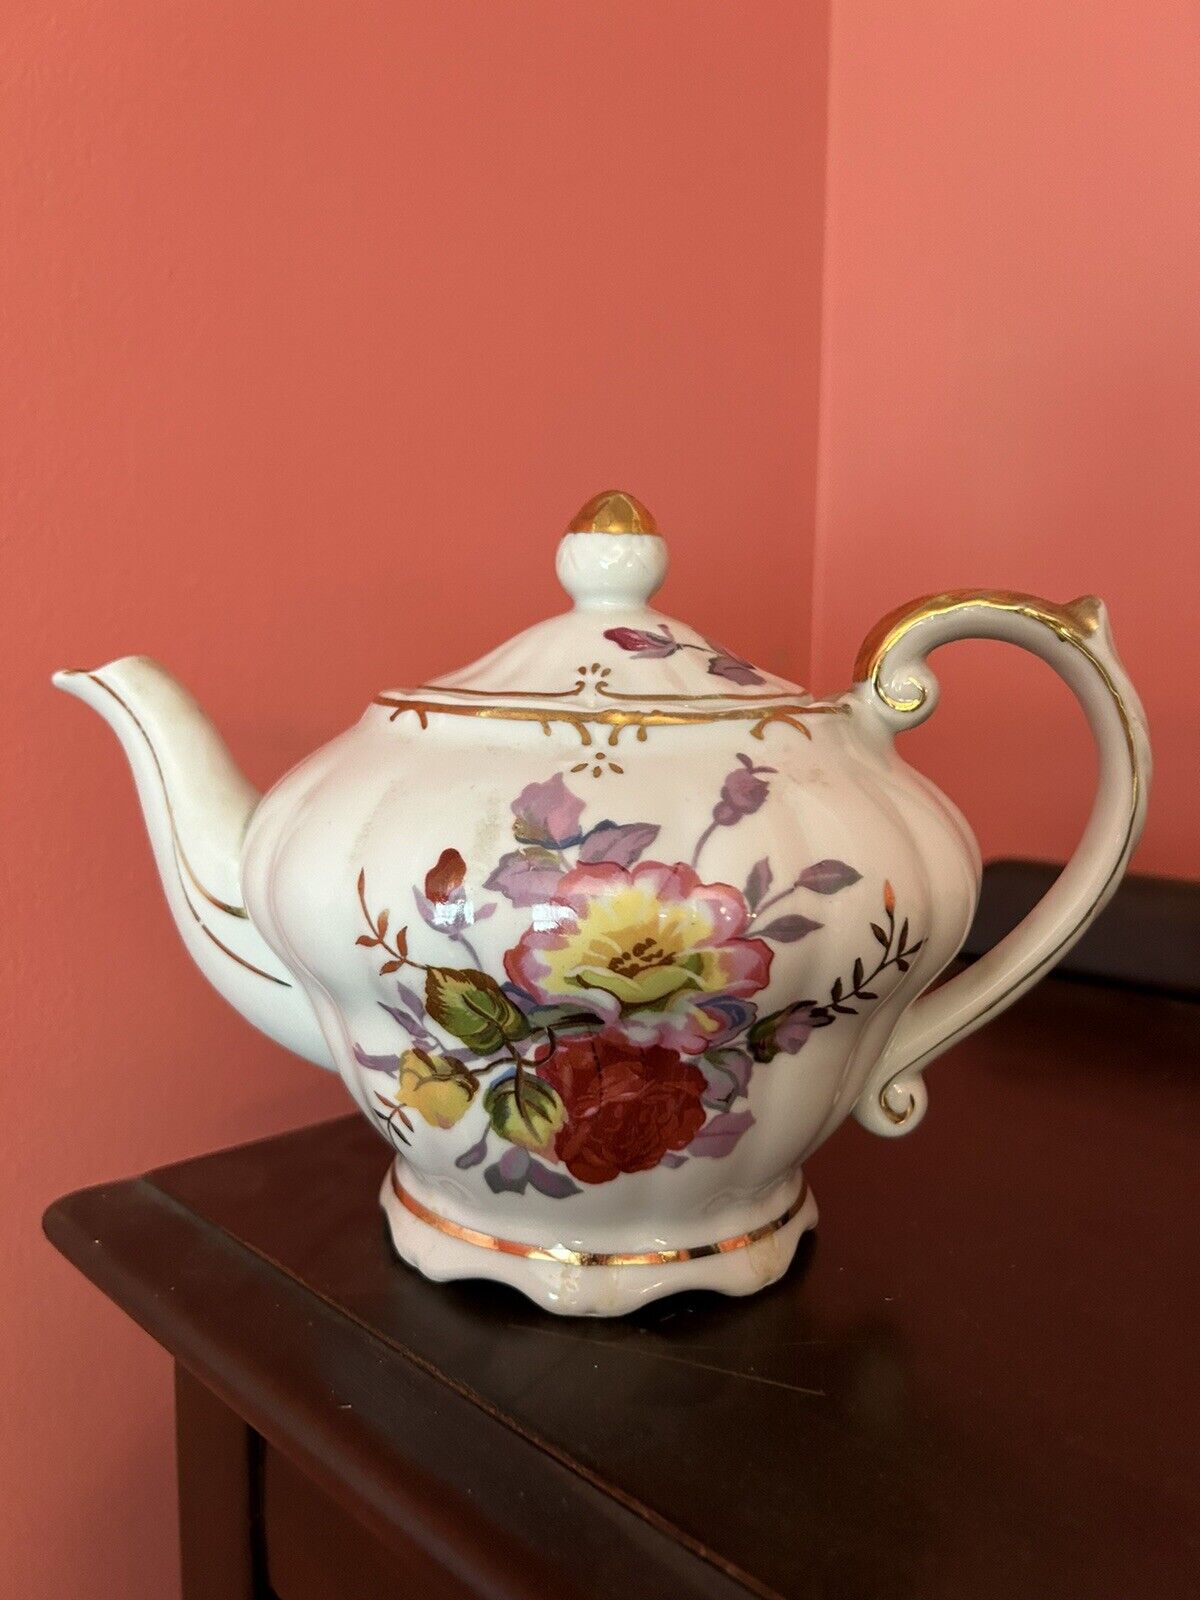 Vintage rose porcelain teapot with music box playing “Tea “For Two”